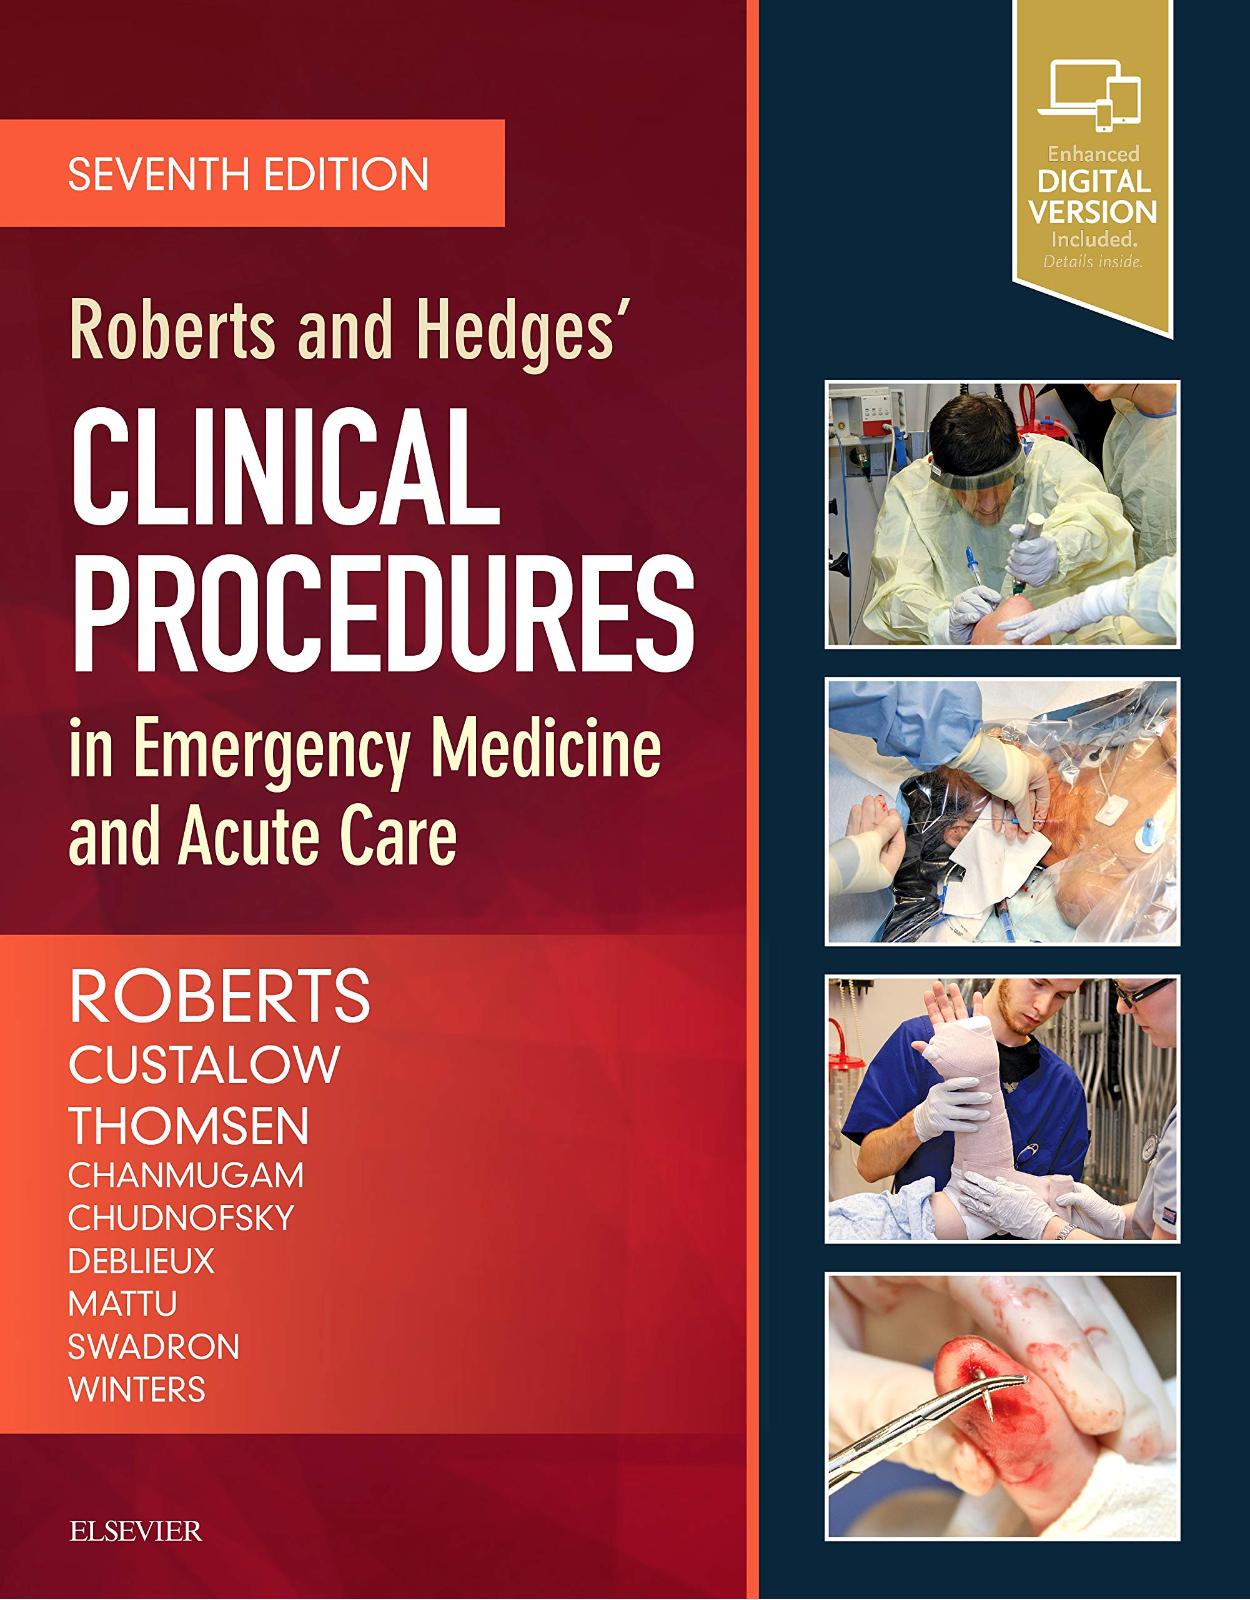 Roberts and Hedges' Clinical Procedures in Emergency Medicine and Acute Care, 7e